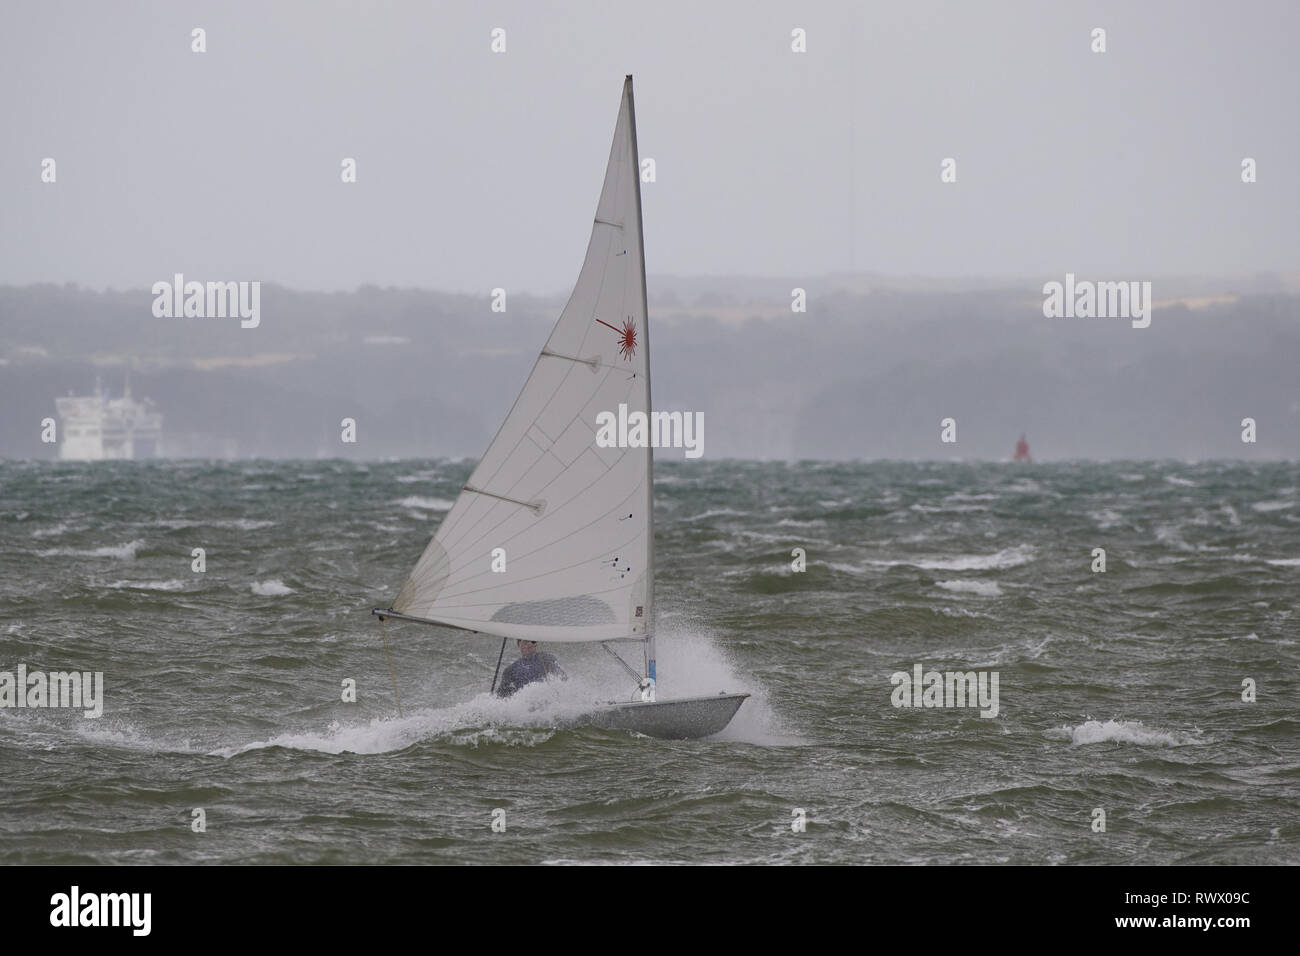 Exhilarating dingy racing in a storm. Monochrome drama battling the sea. Stock Photo